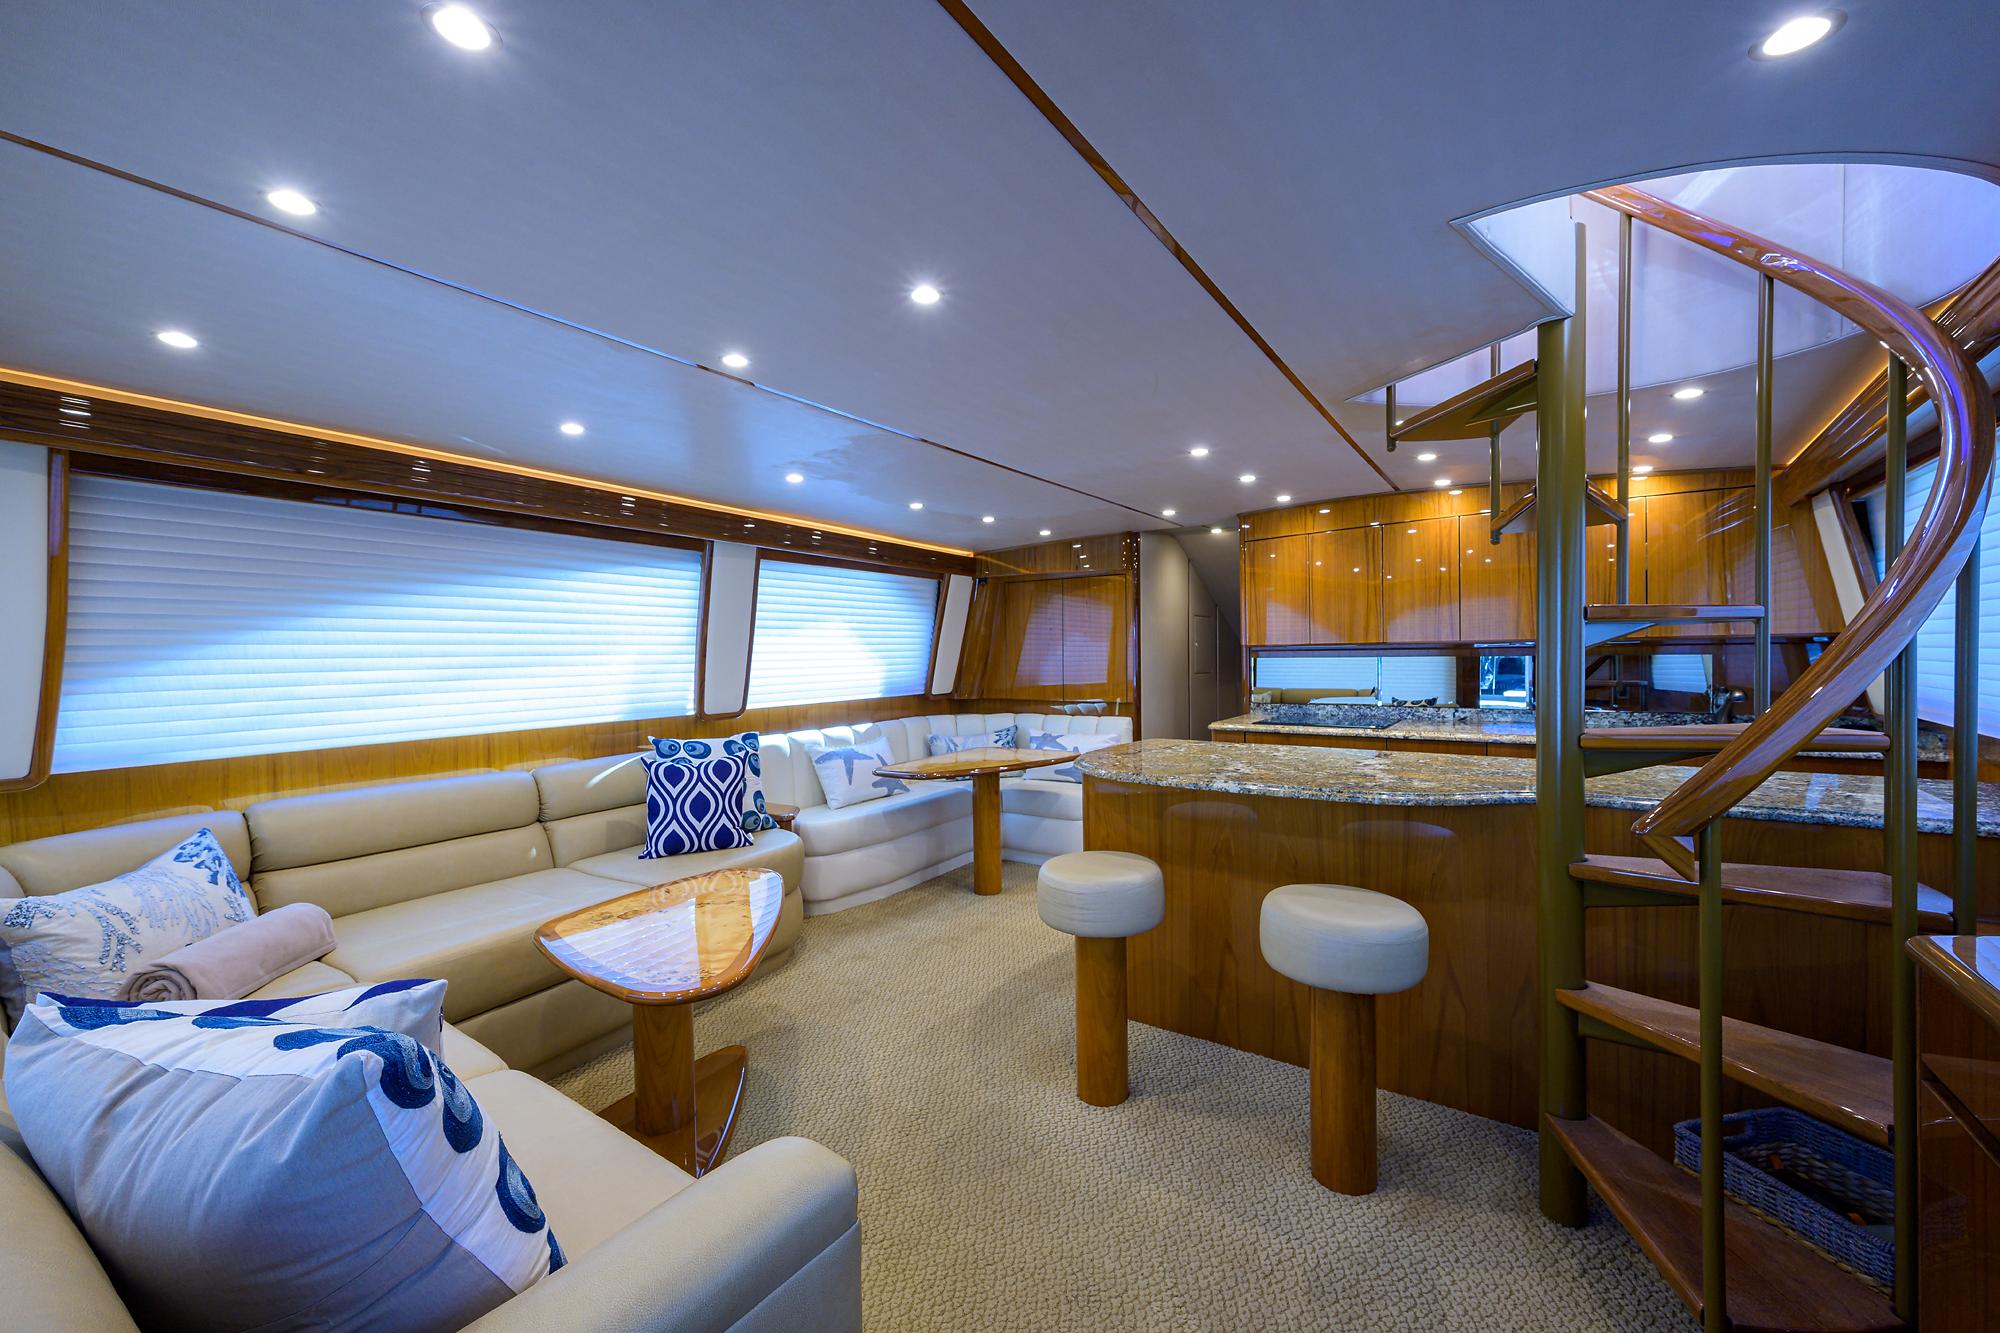 Viking 62 Chelsea - Salon Seating and Staircase to Enclosed Bridge